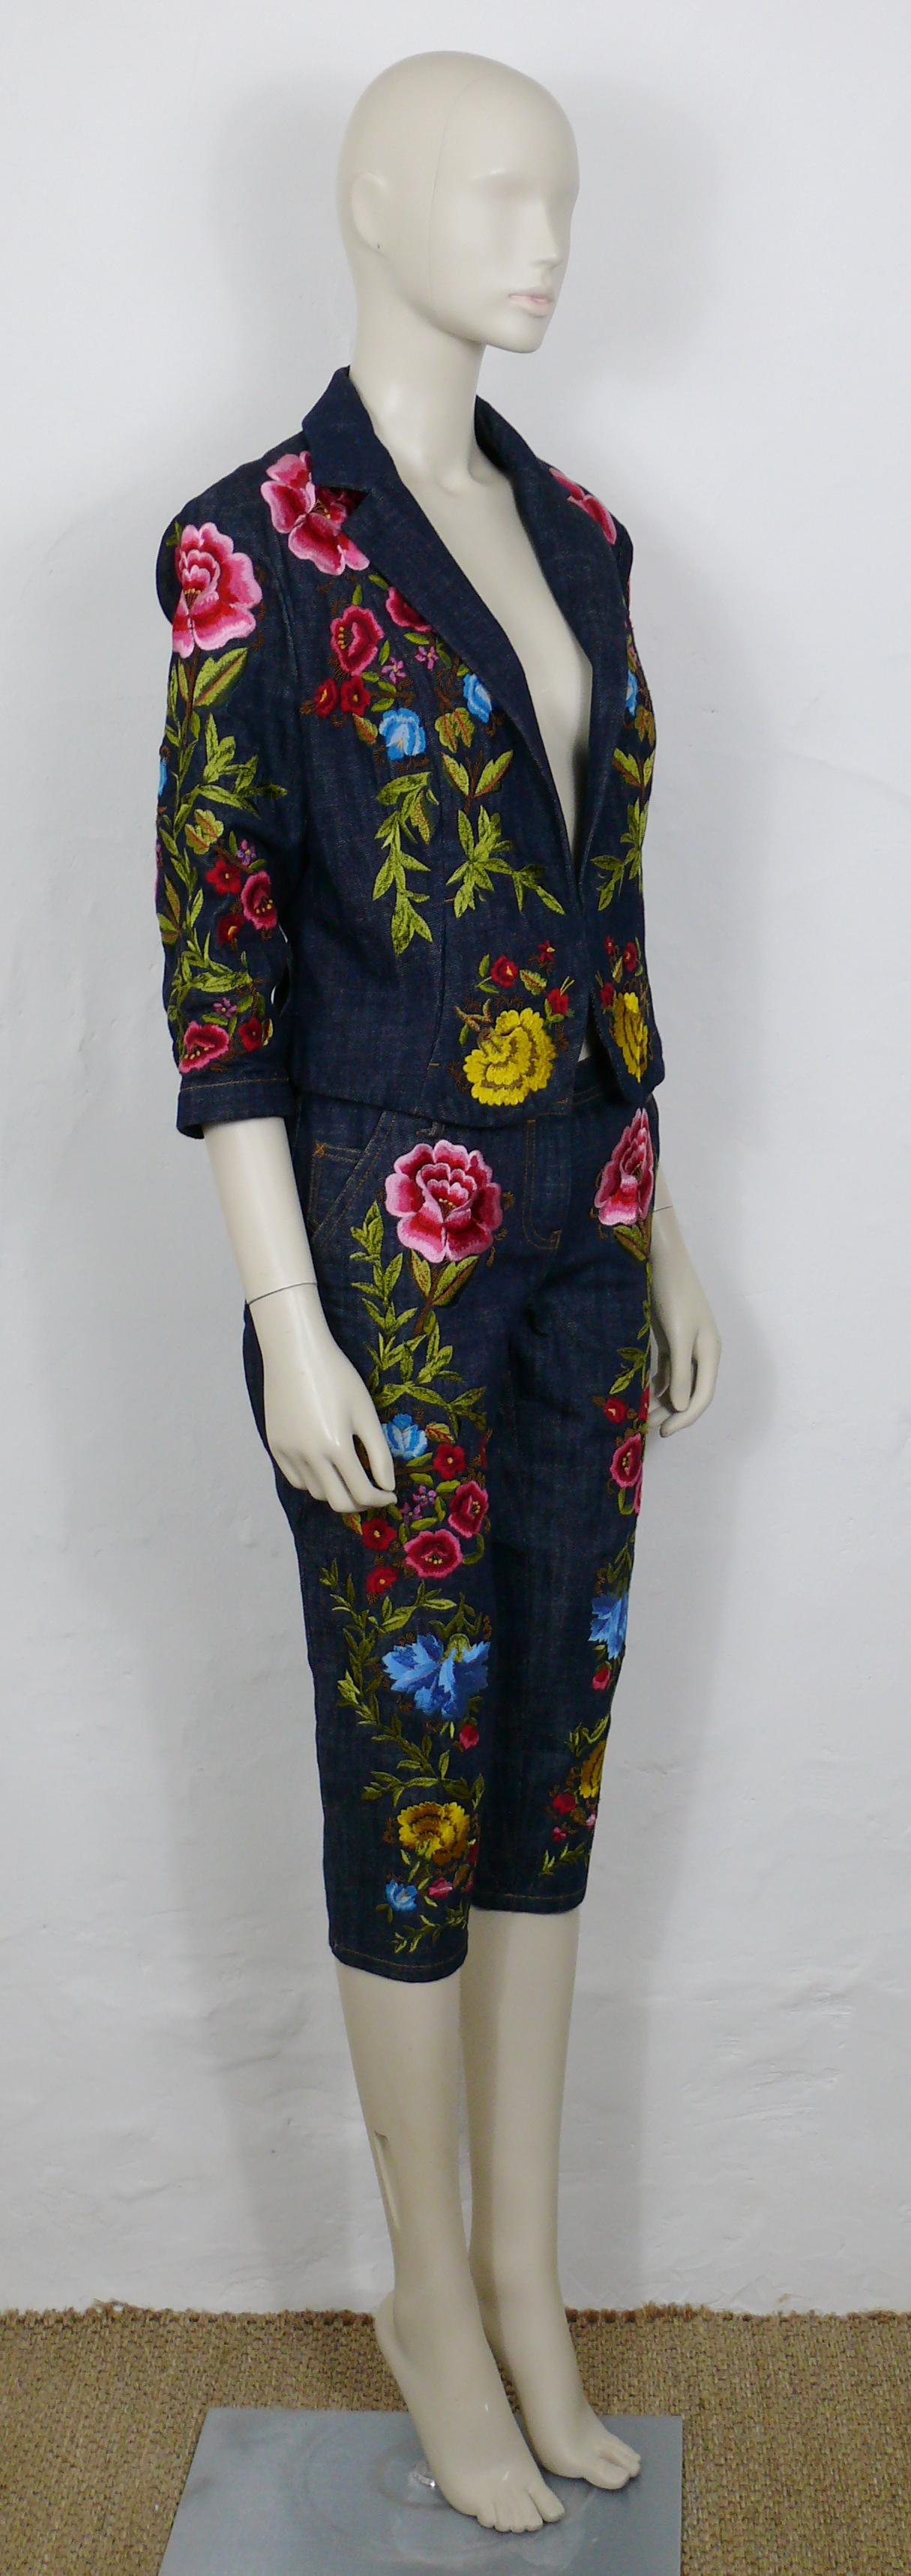 CHRISTIAN LACROIX vintage denim blazer and cropped pants trousers ensemble featuring a gorgeous embroidered floral design.

Label reads CHRISTIAN LACROIX. 
Made in China.

BLAZER features :
- Blue denim featuring a gorgeous multicolored embroidered